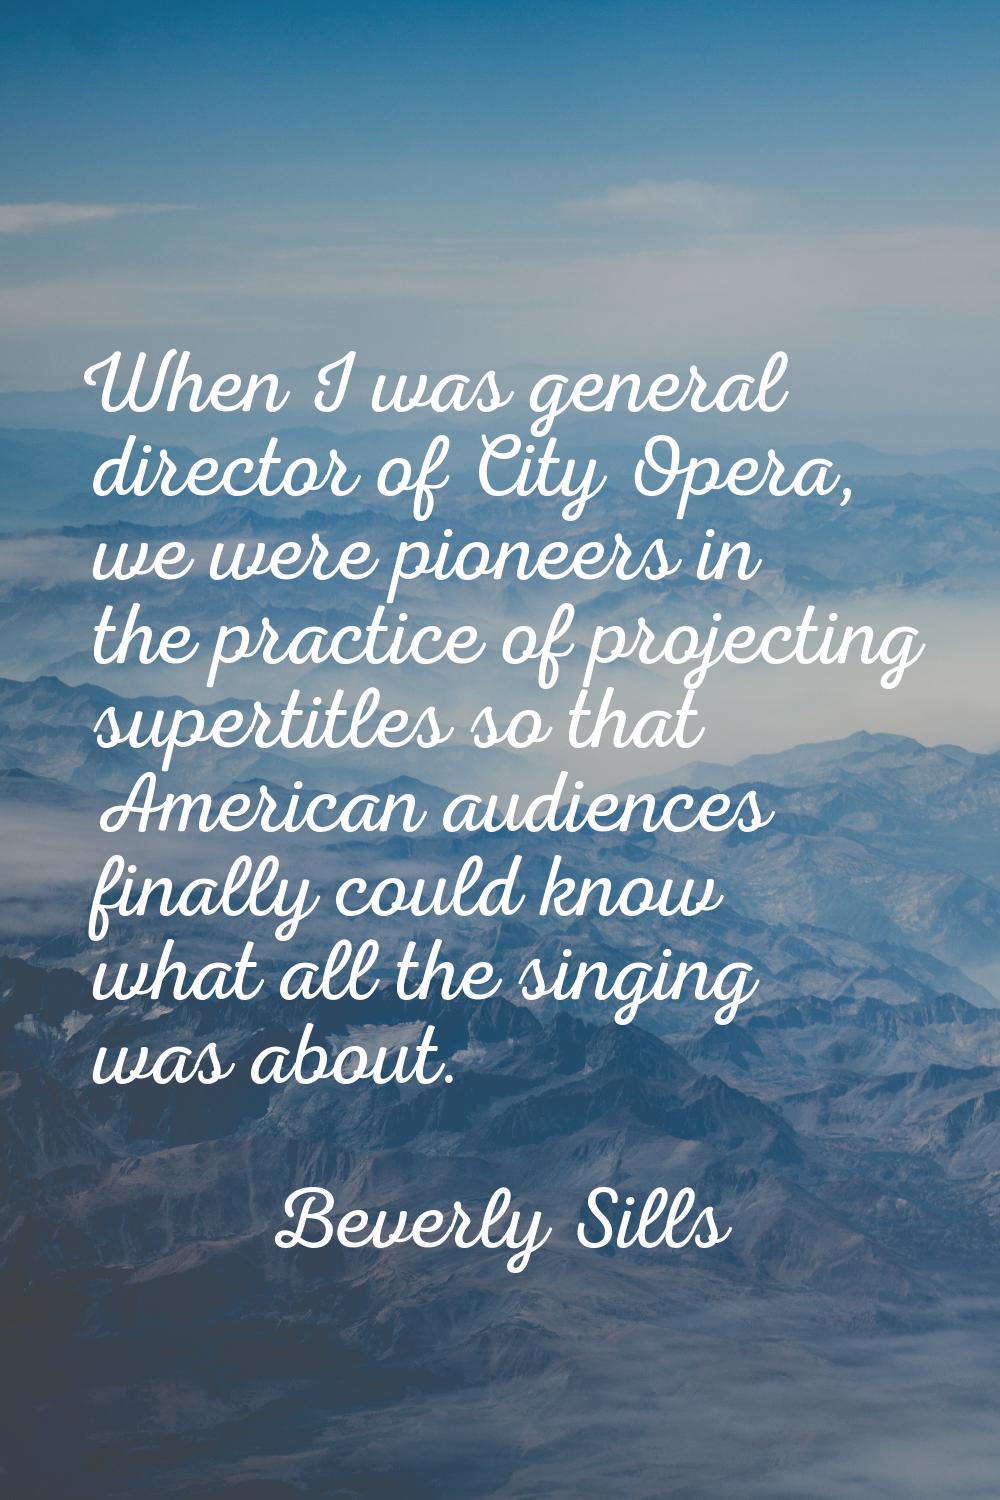 When I was general director of City Opera, we were pioneers in the practice of projecting supertitl